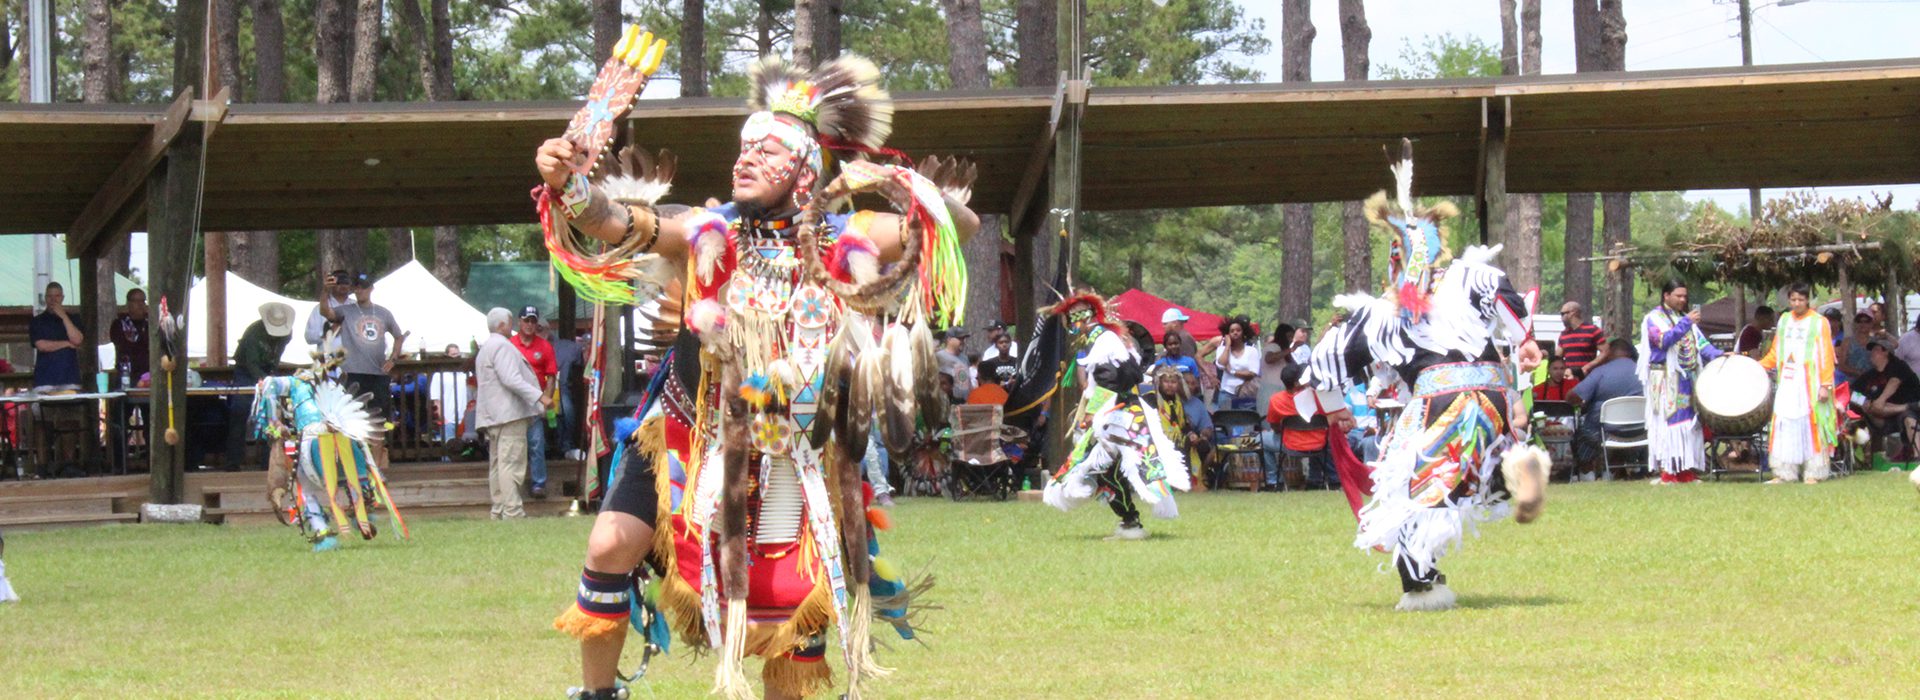 Members of the Lumbee Tribe are dressed in colorful and traditional dance apparel during a performance at the Lumbee Tribe Homecoming in North Carolina.  